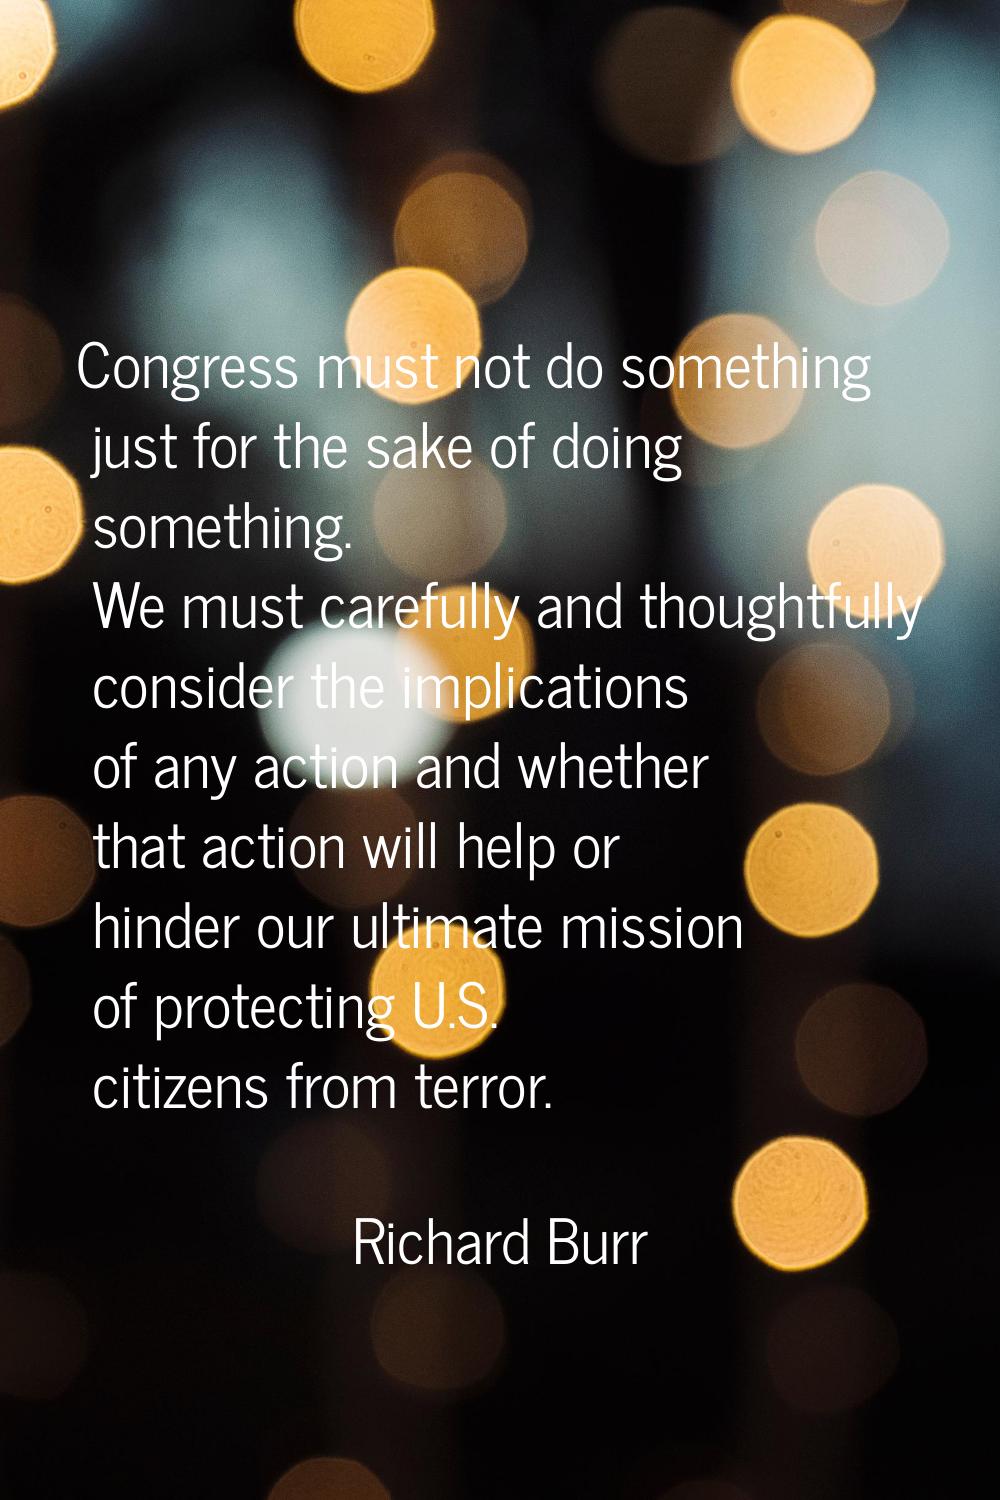 Congress must not do something just for the sake of doing something. We must carefully and thoughtf